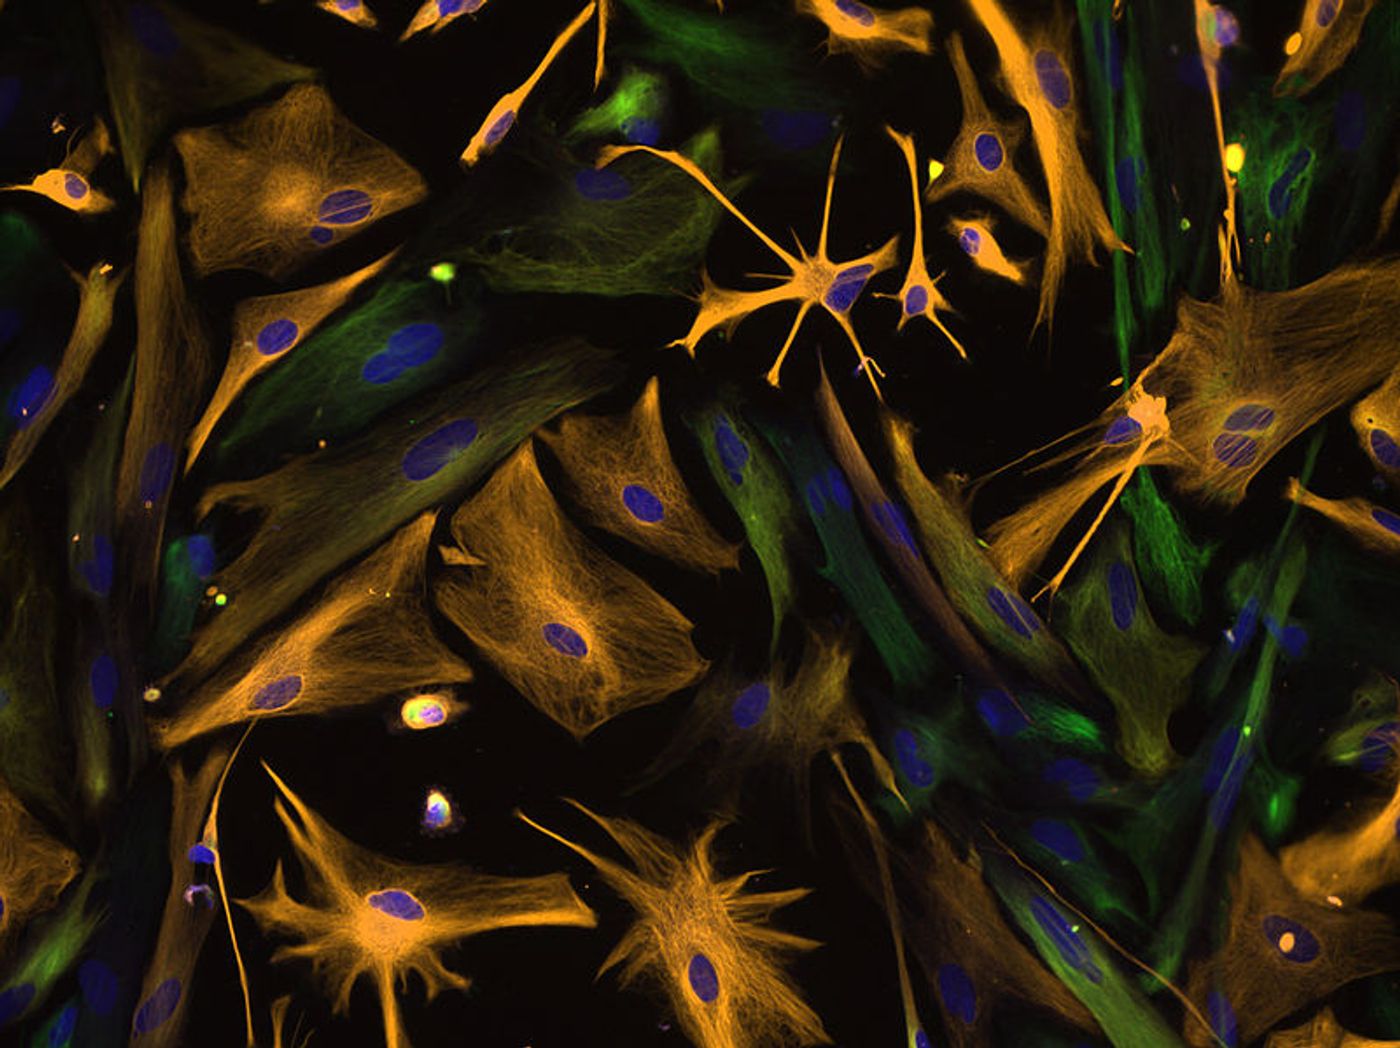 Multipotential Human Neural Progenitor Cells / Credit: NIH